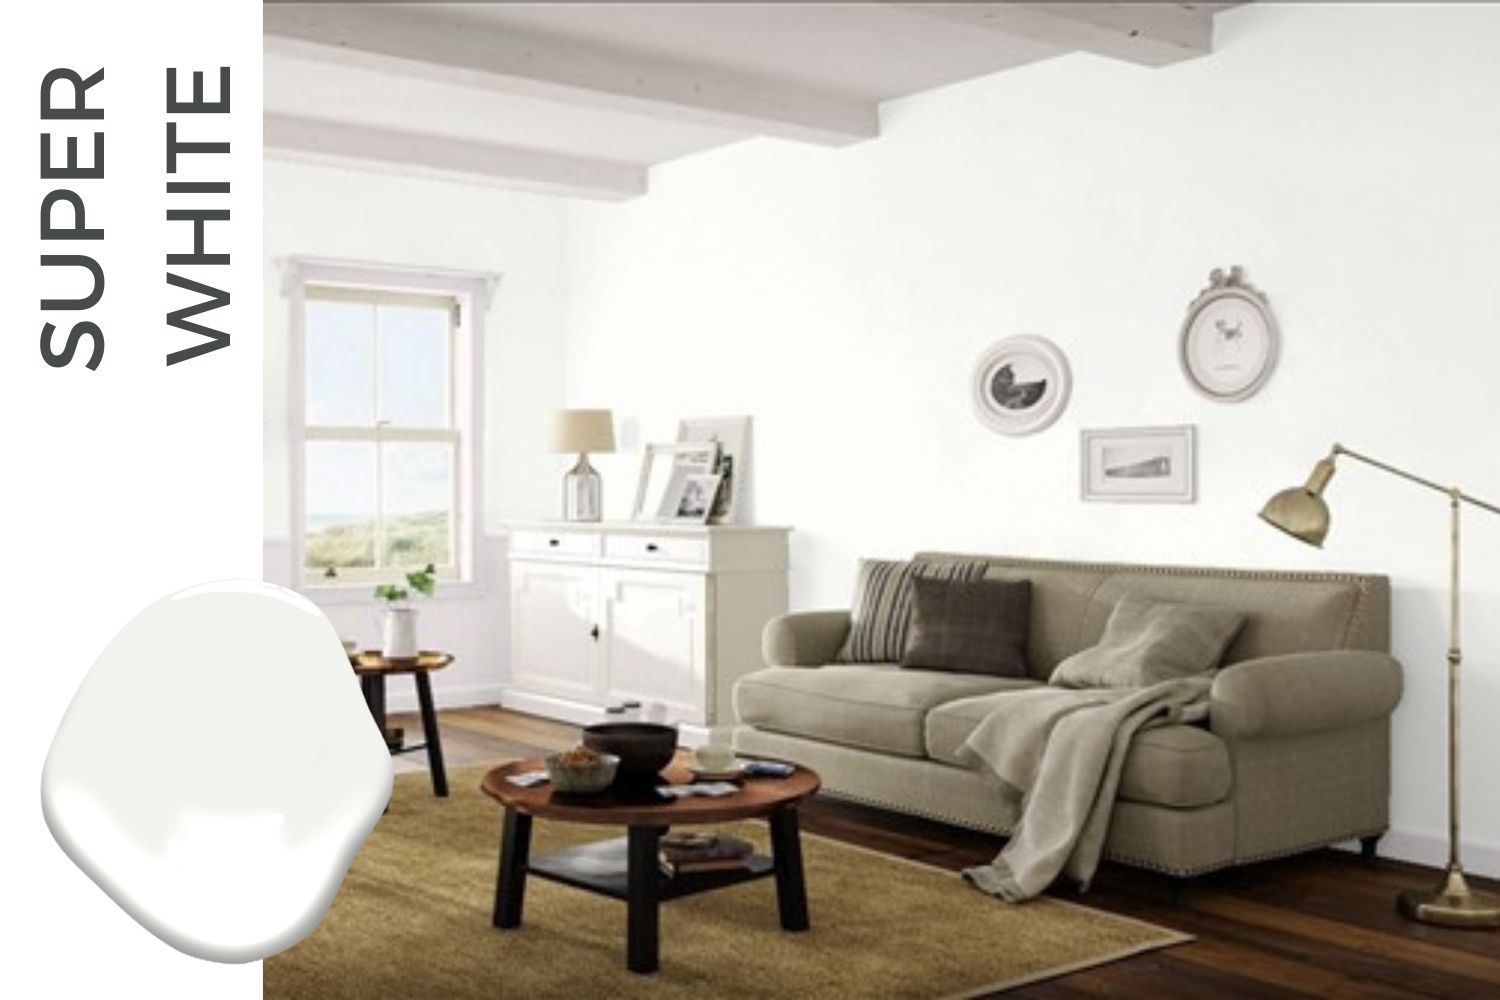 10 of the BEST Benjamin Moore White Paint Colors for Your Interior